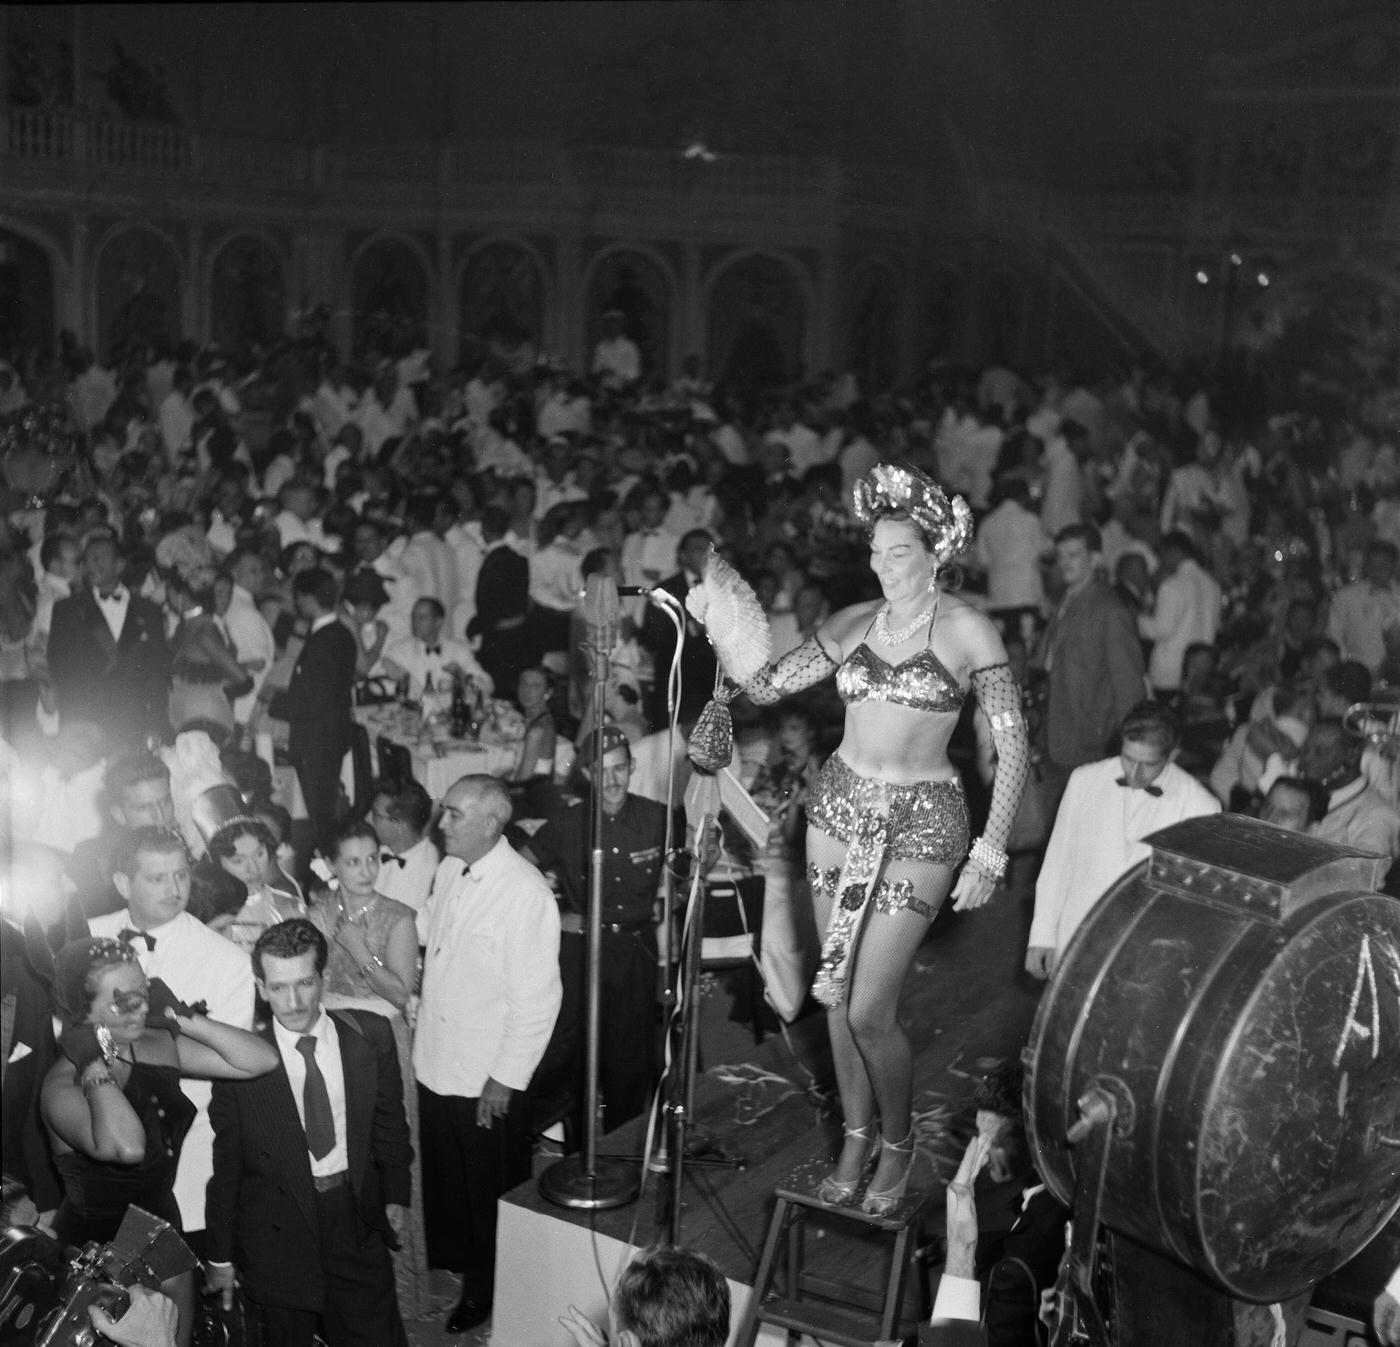 Dancing and Celebrating in Costumes, Rio Carnival 1953